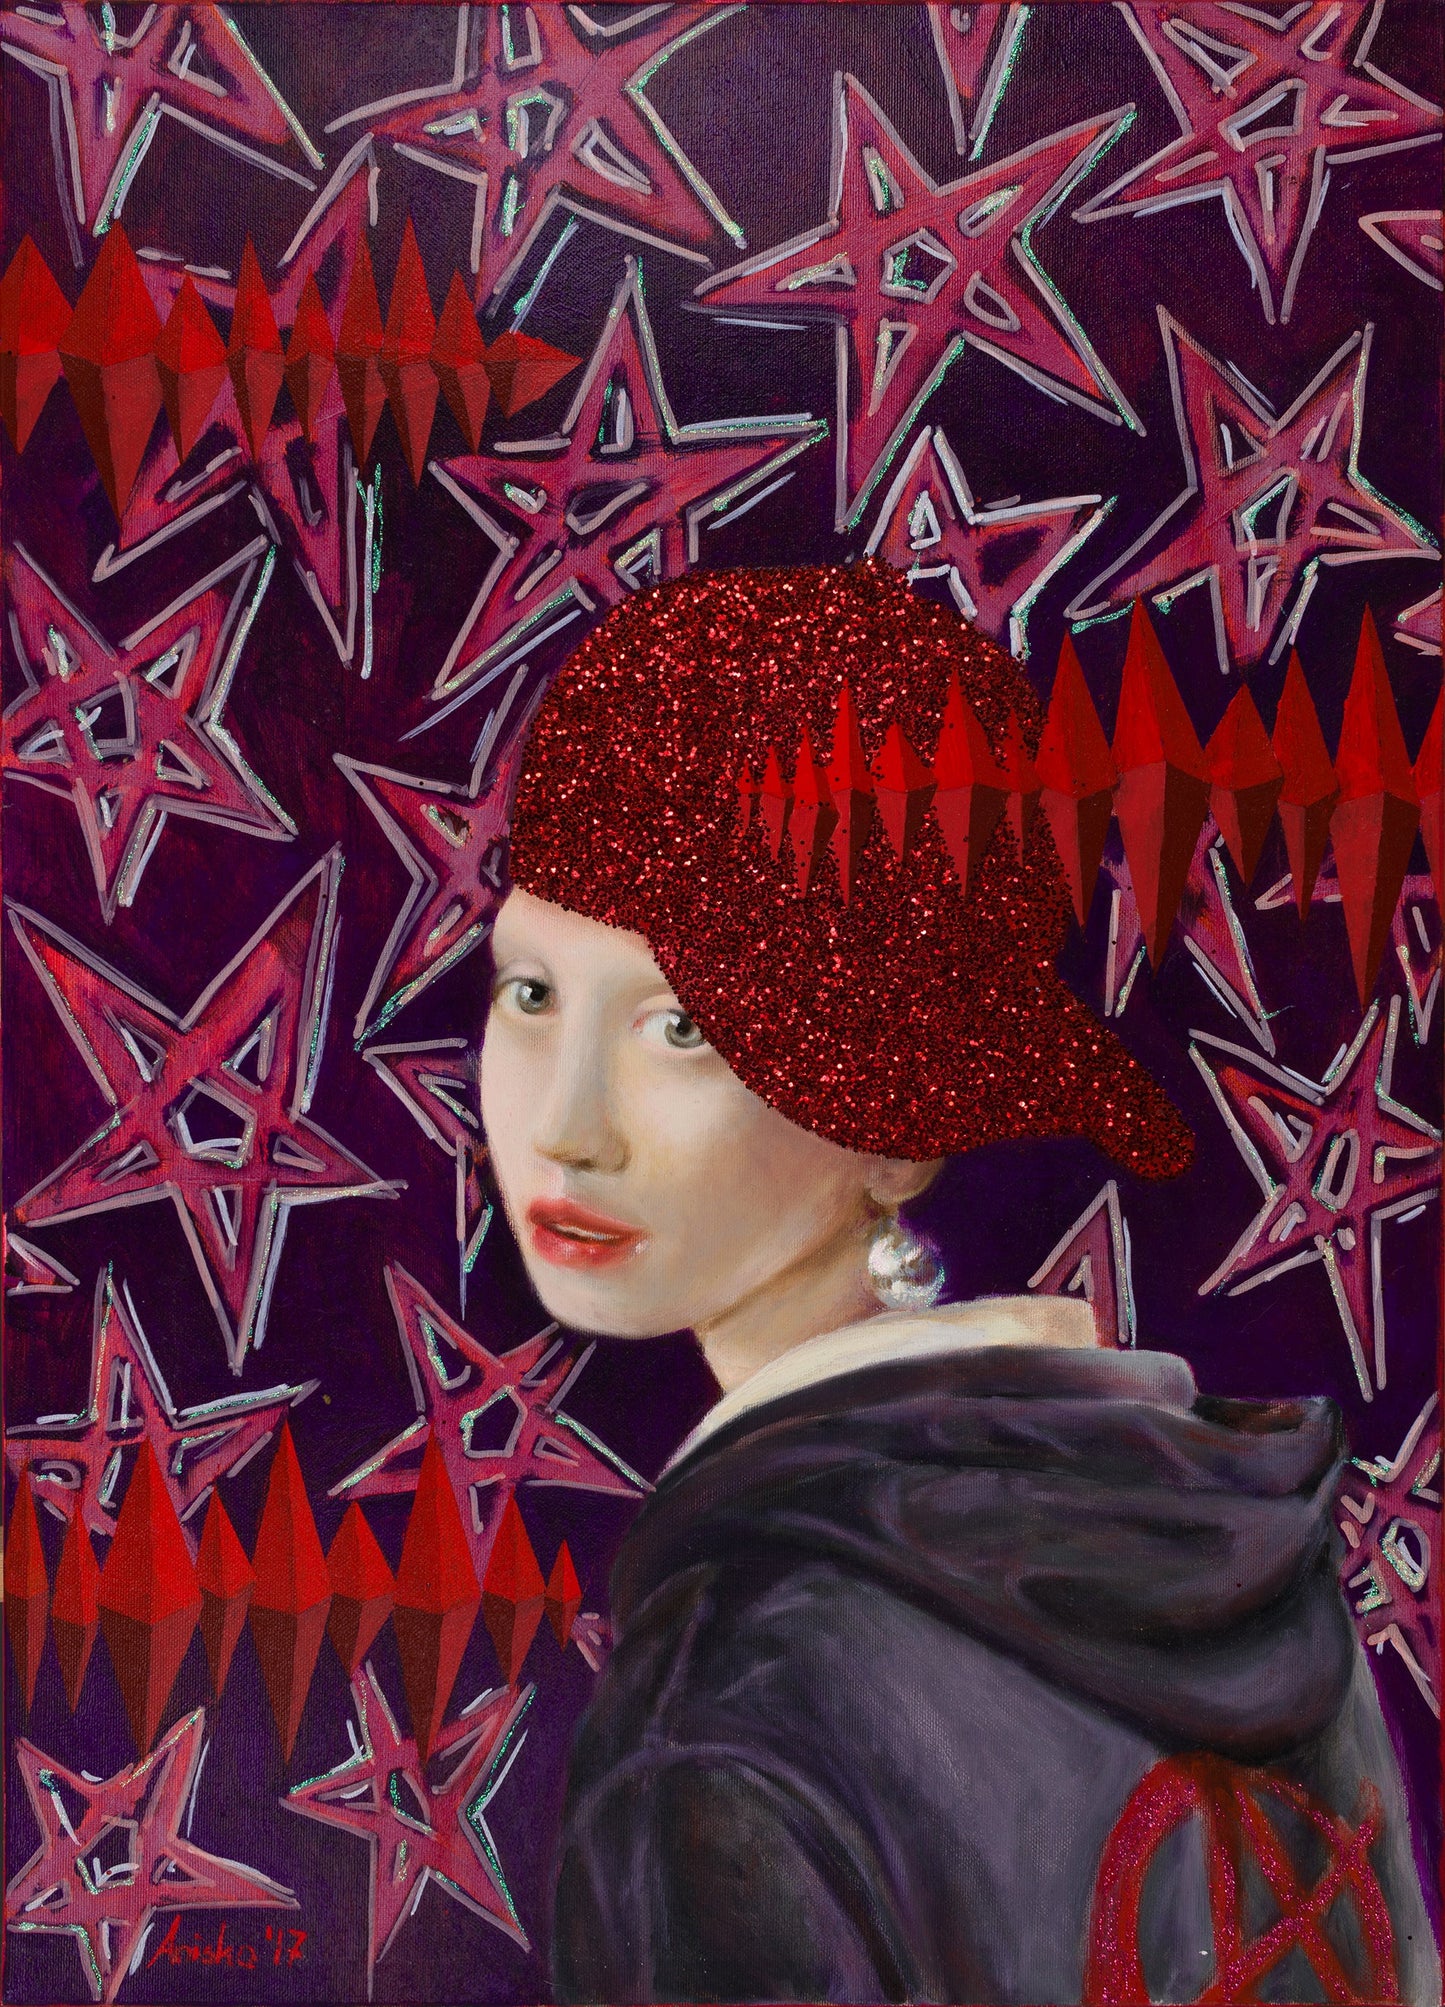 Girl with a Pearl Earring and Glitter Cap